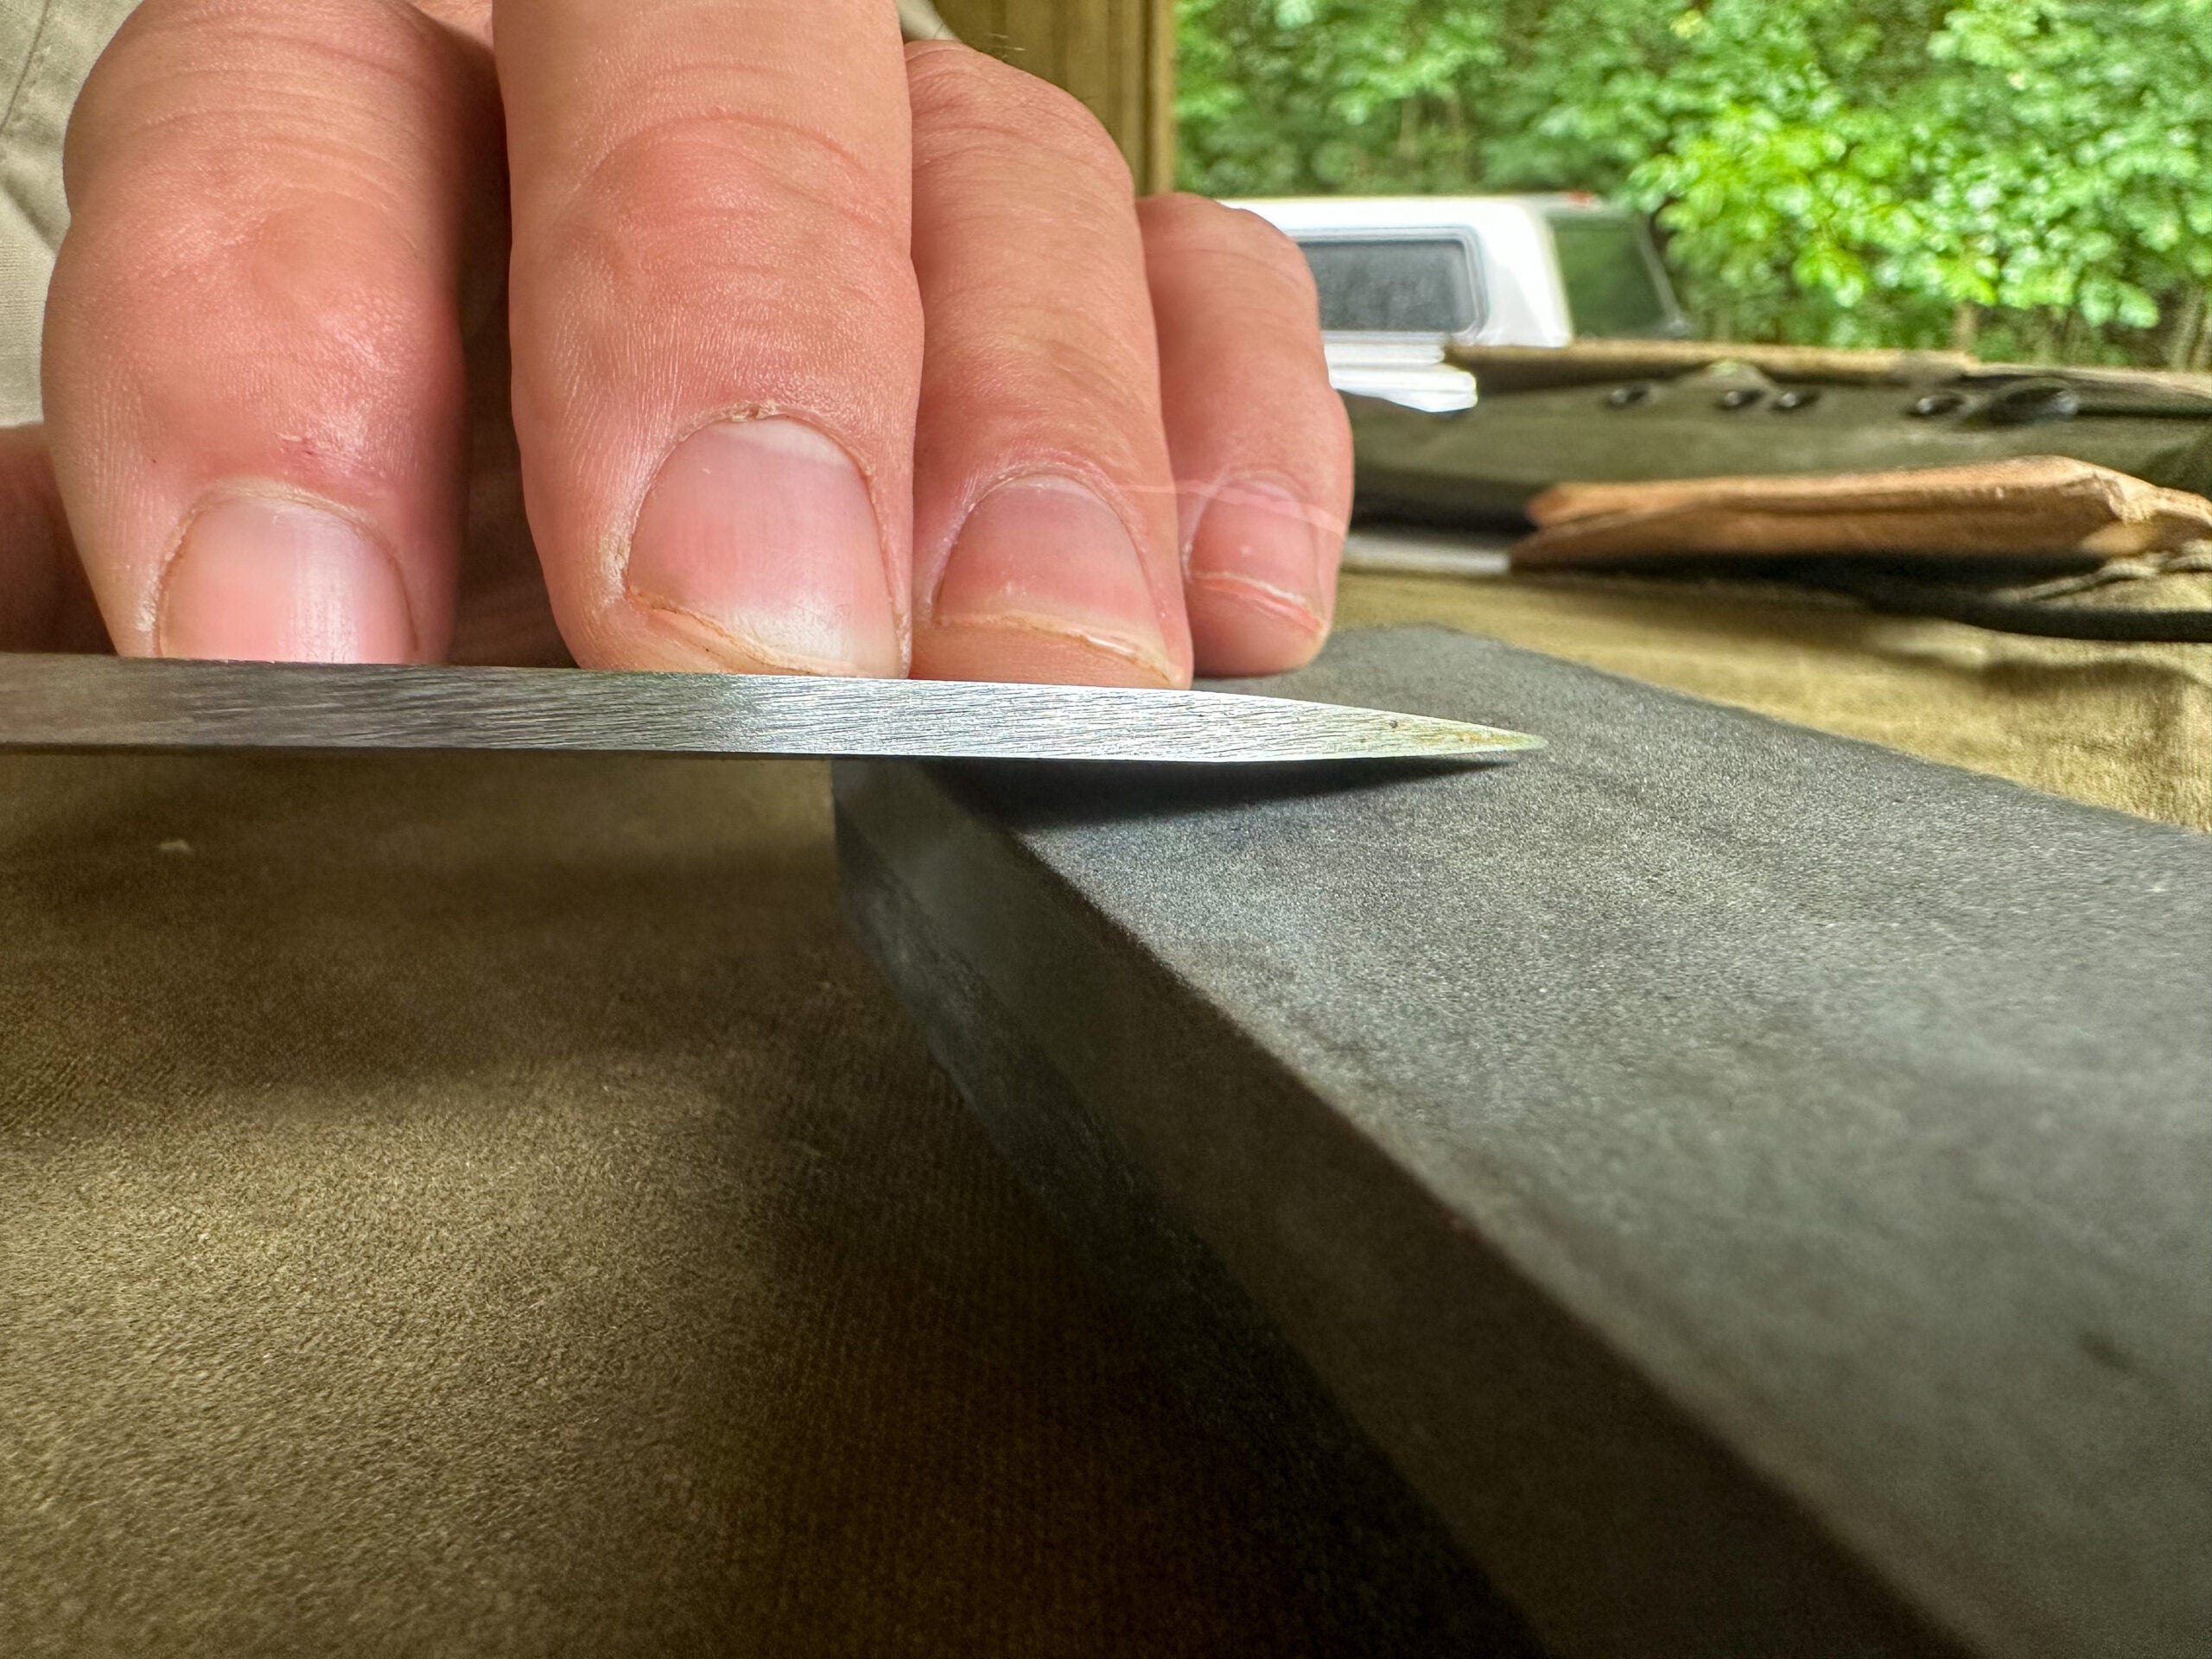 Sharpening a knife on a whetstone